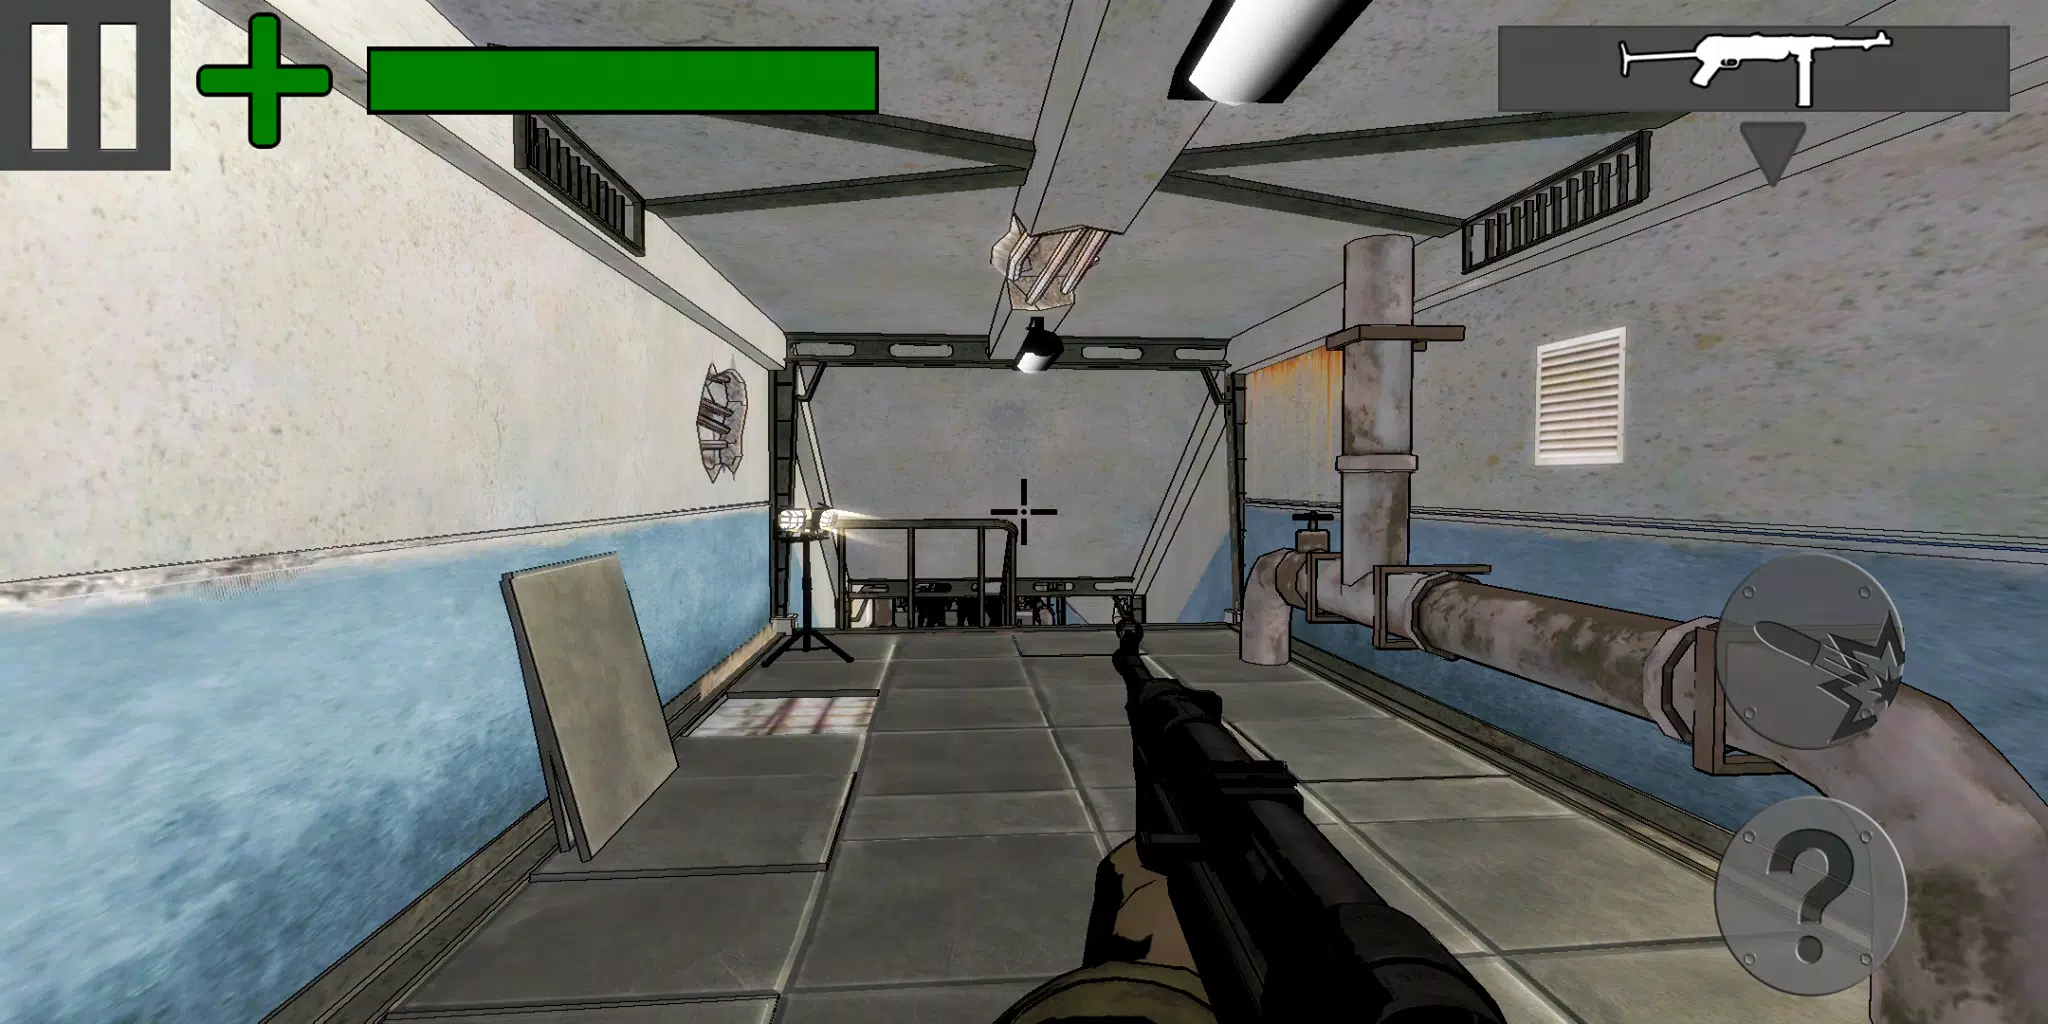 Bunker Z - WW2 Arcade FPS for Android - Download